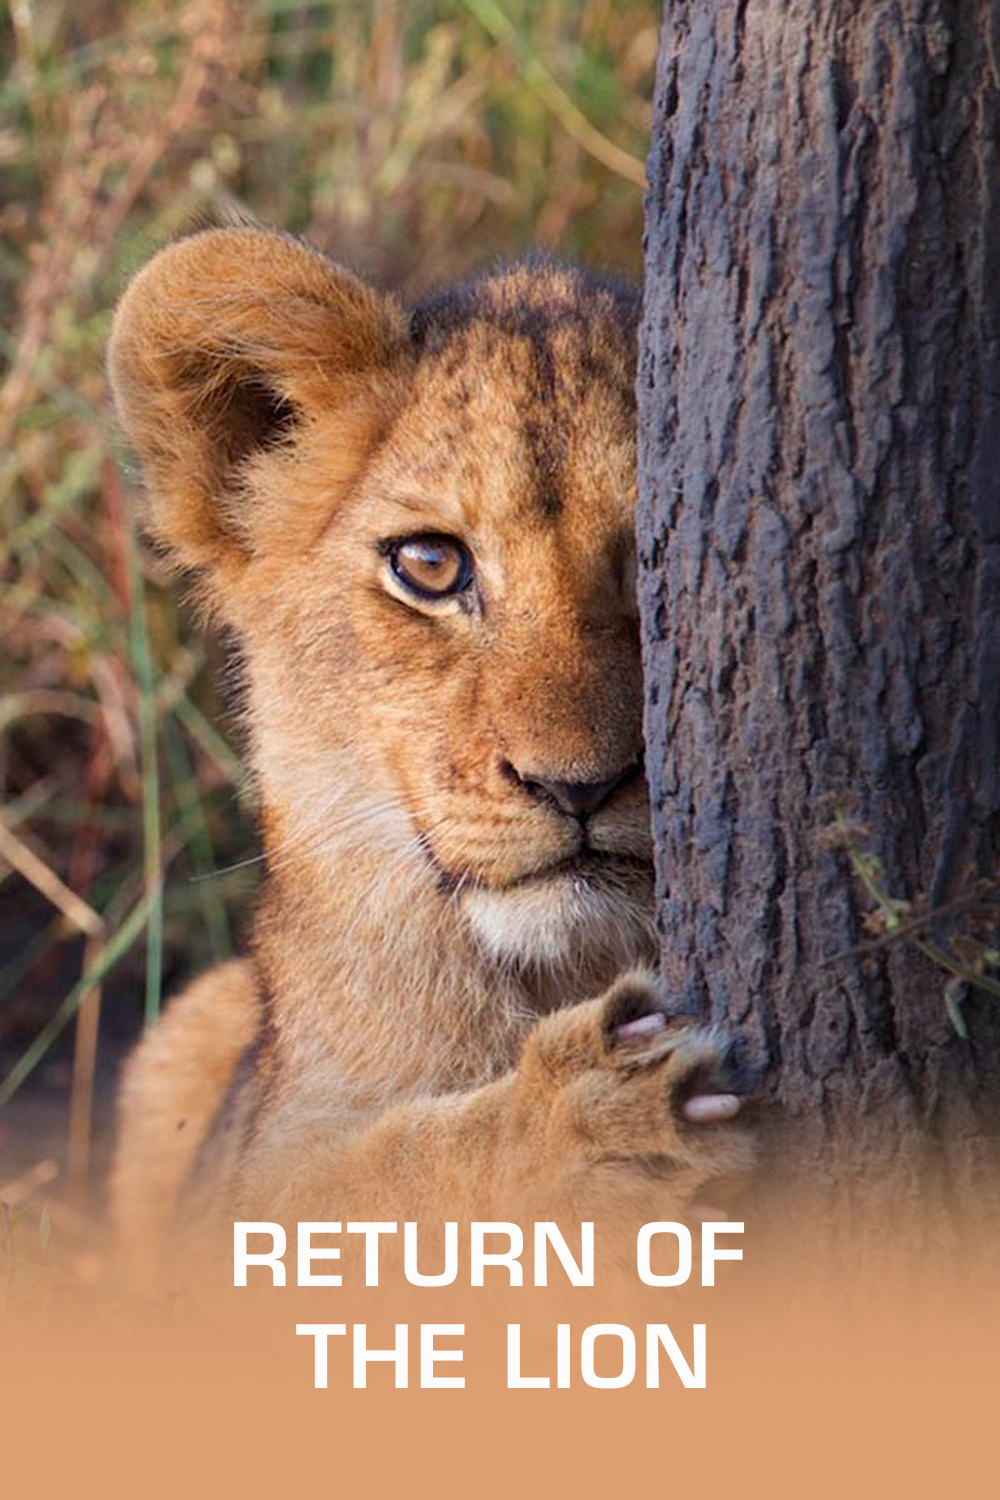 Return of the Lion